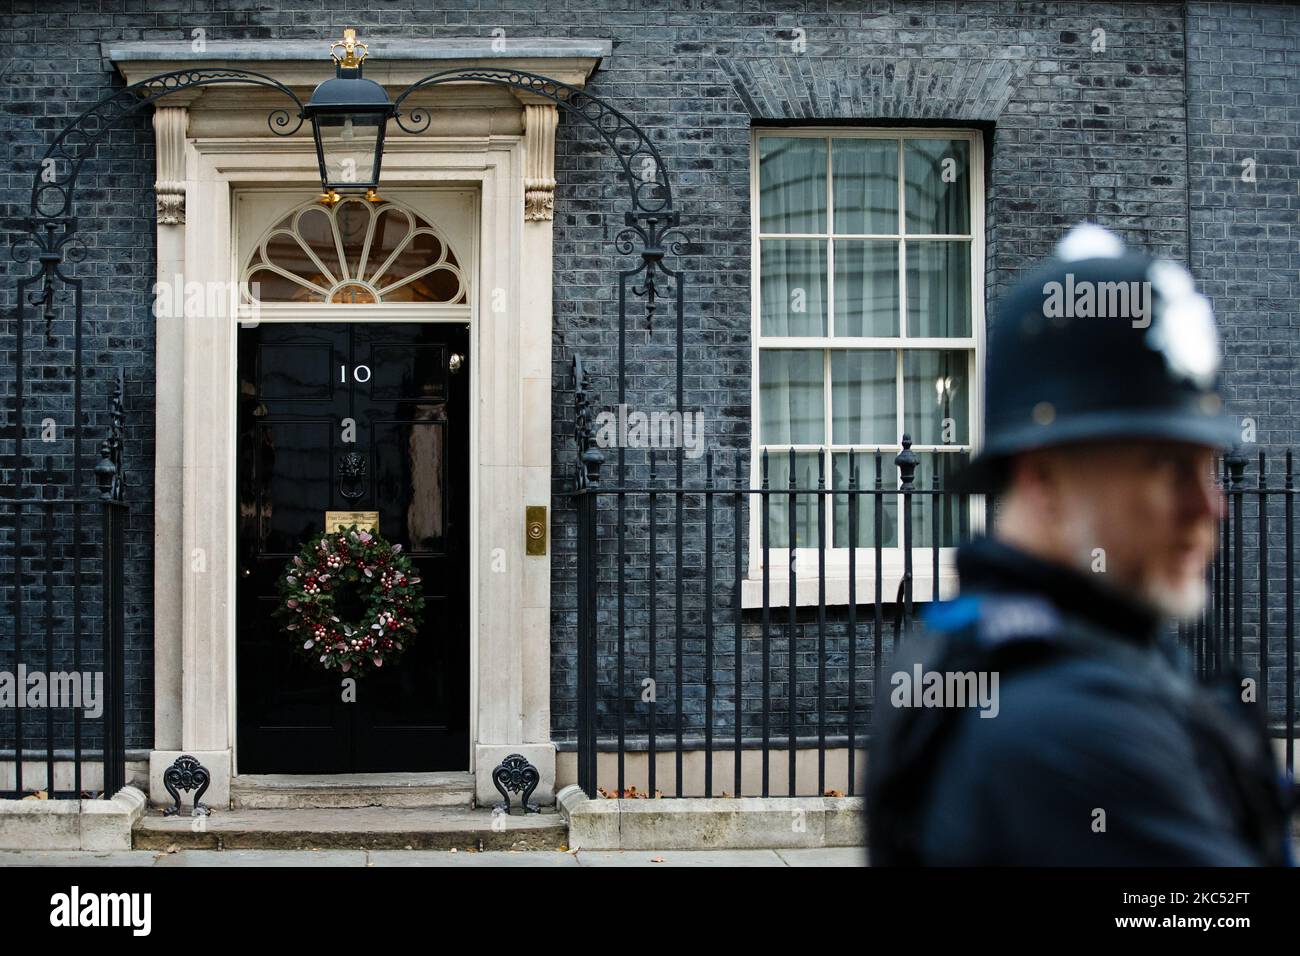 A police officer stands guard outside the door of 10 Downing Street, on which now hangs a Christmas wreath for the festive season, in London, England, on December 1, 2020. (Photo by David Cliff/NurPhoto) Stock Photo